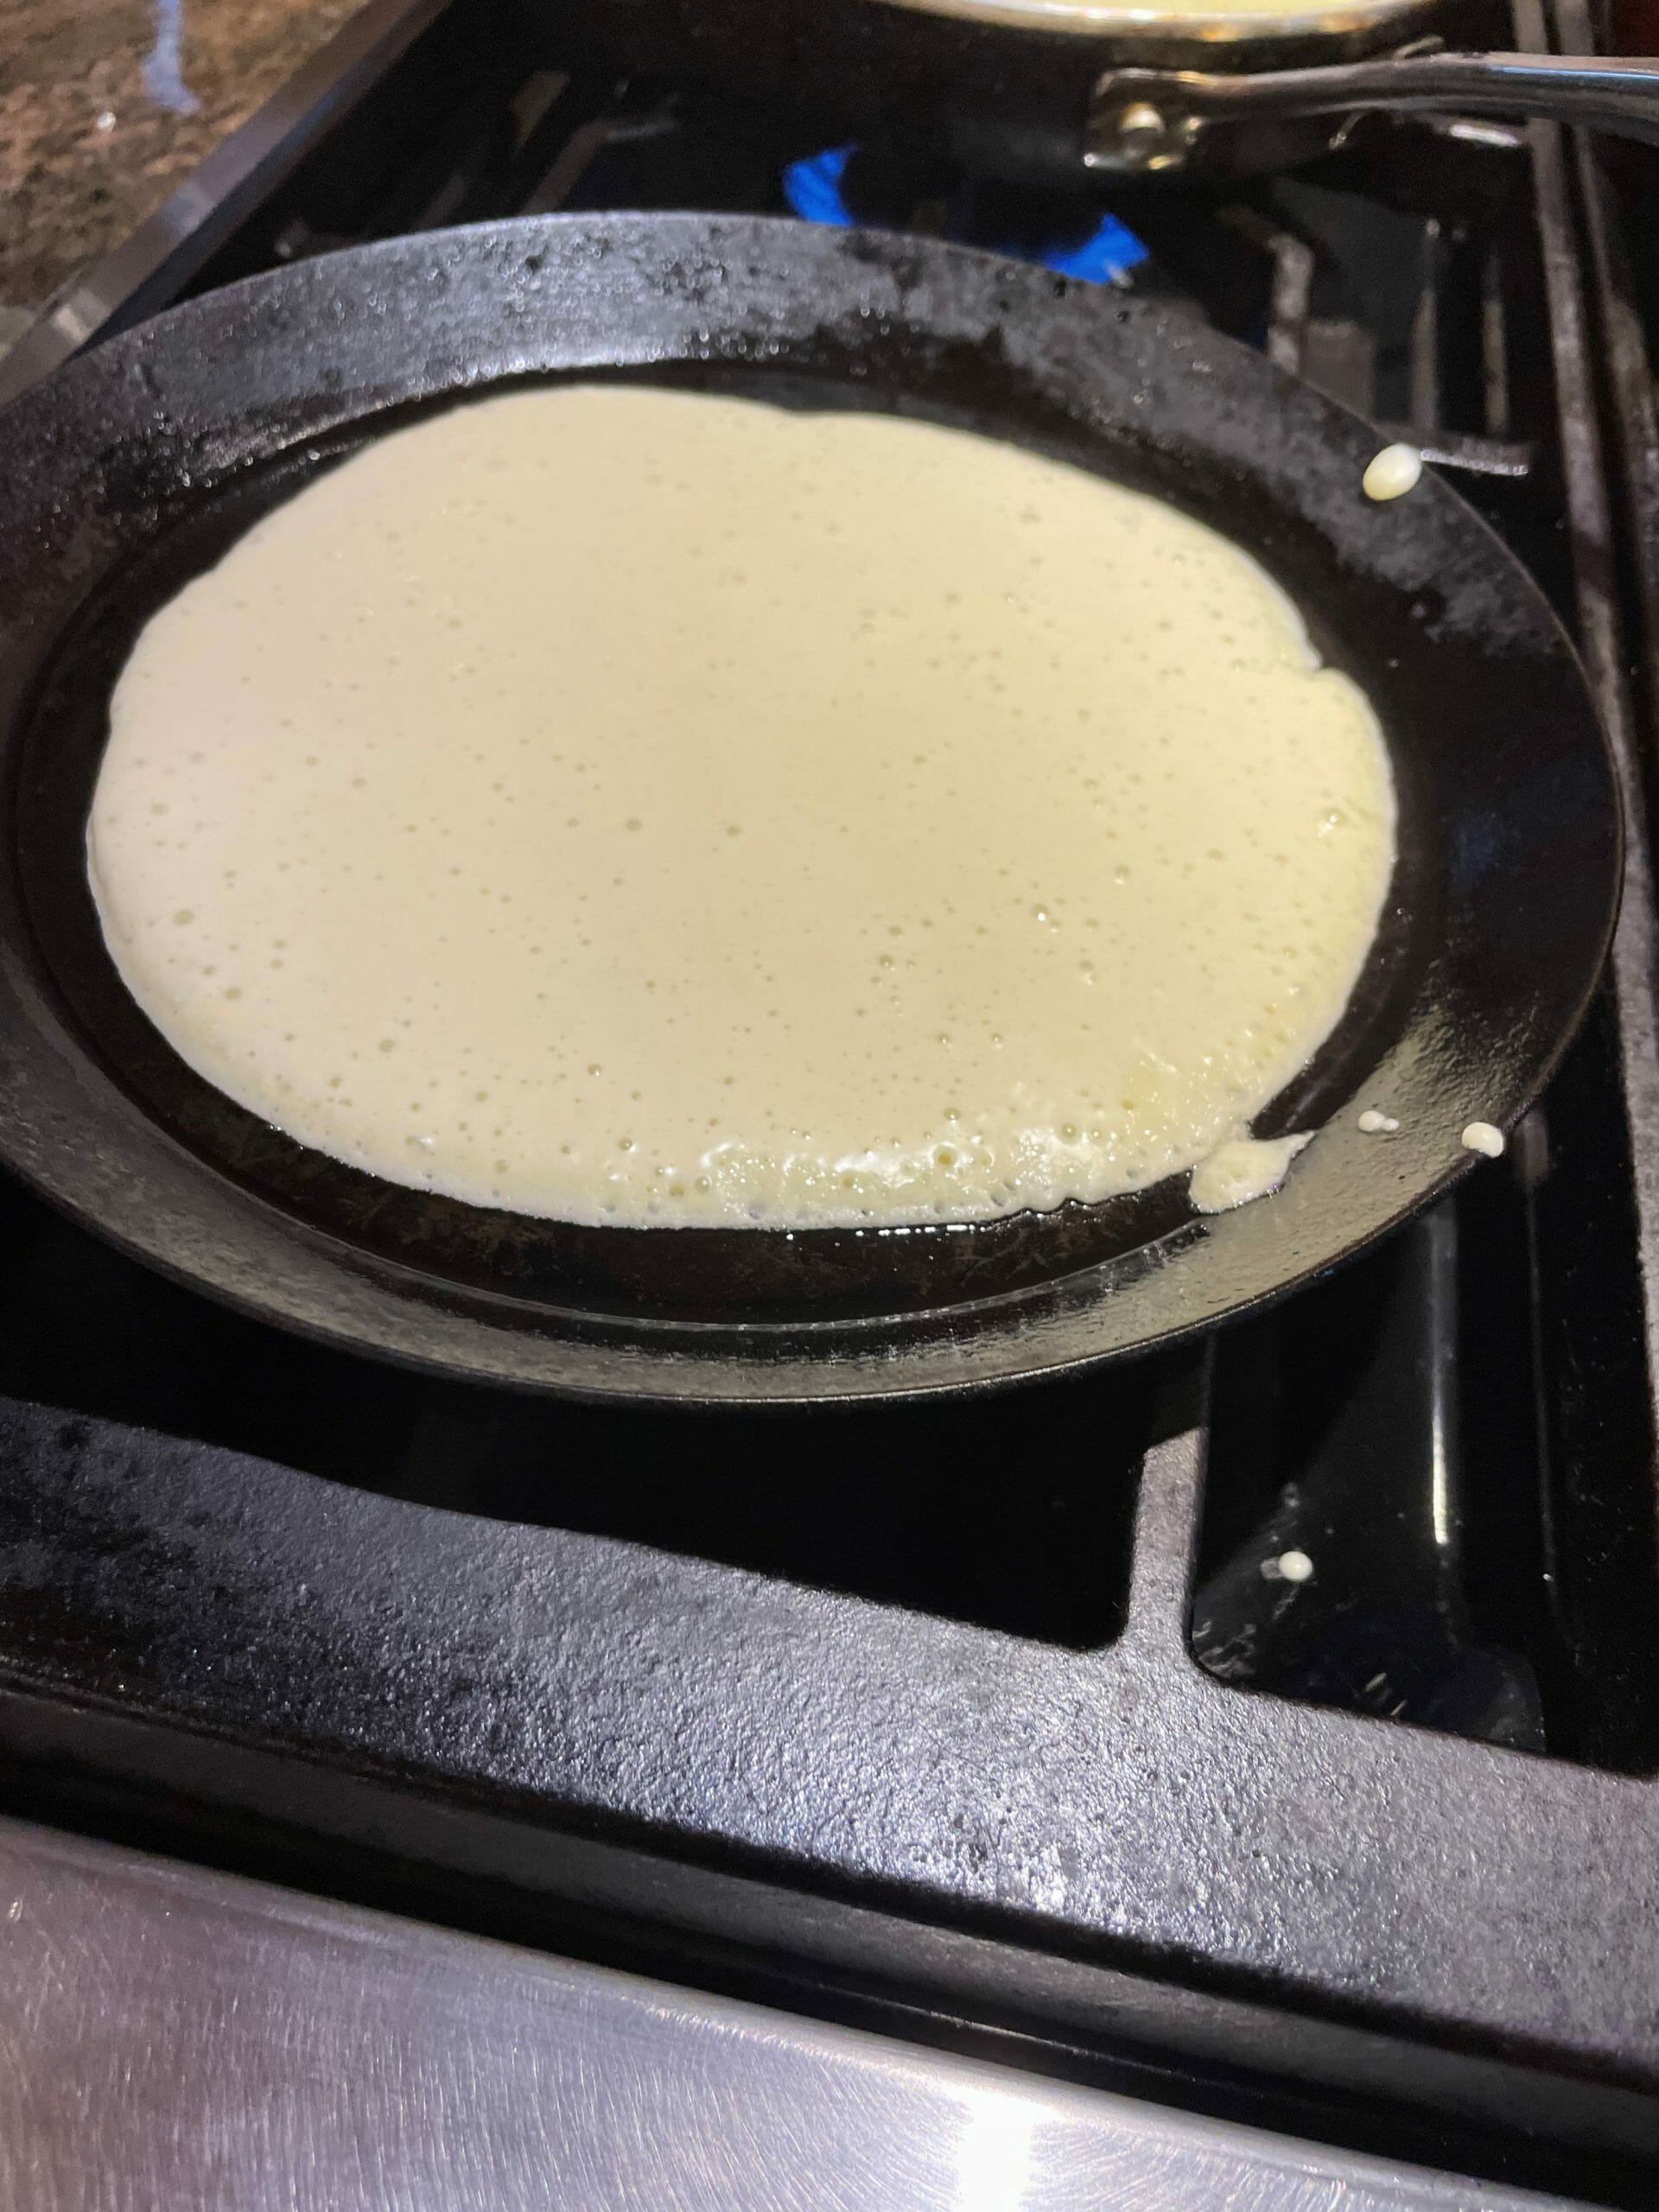 French Crepe Recipe, French Crepe Recipe